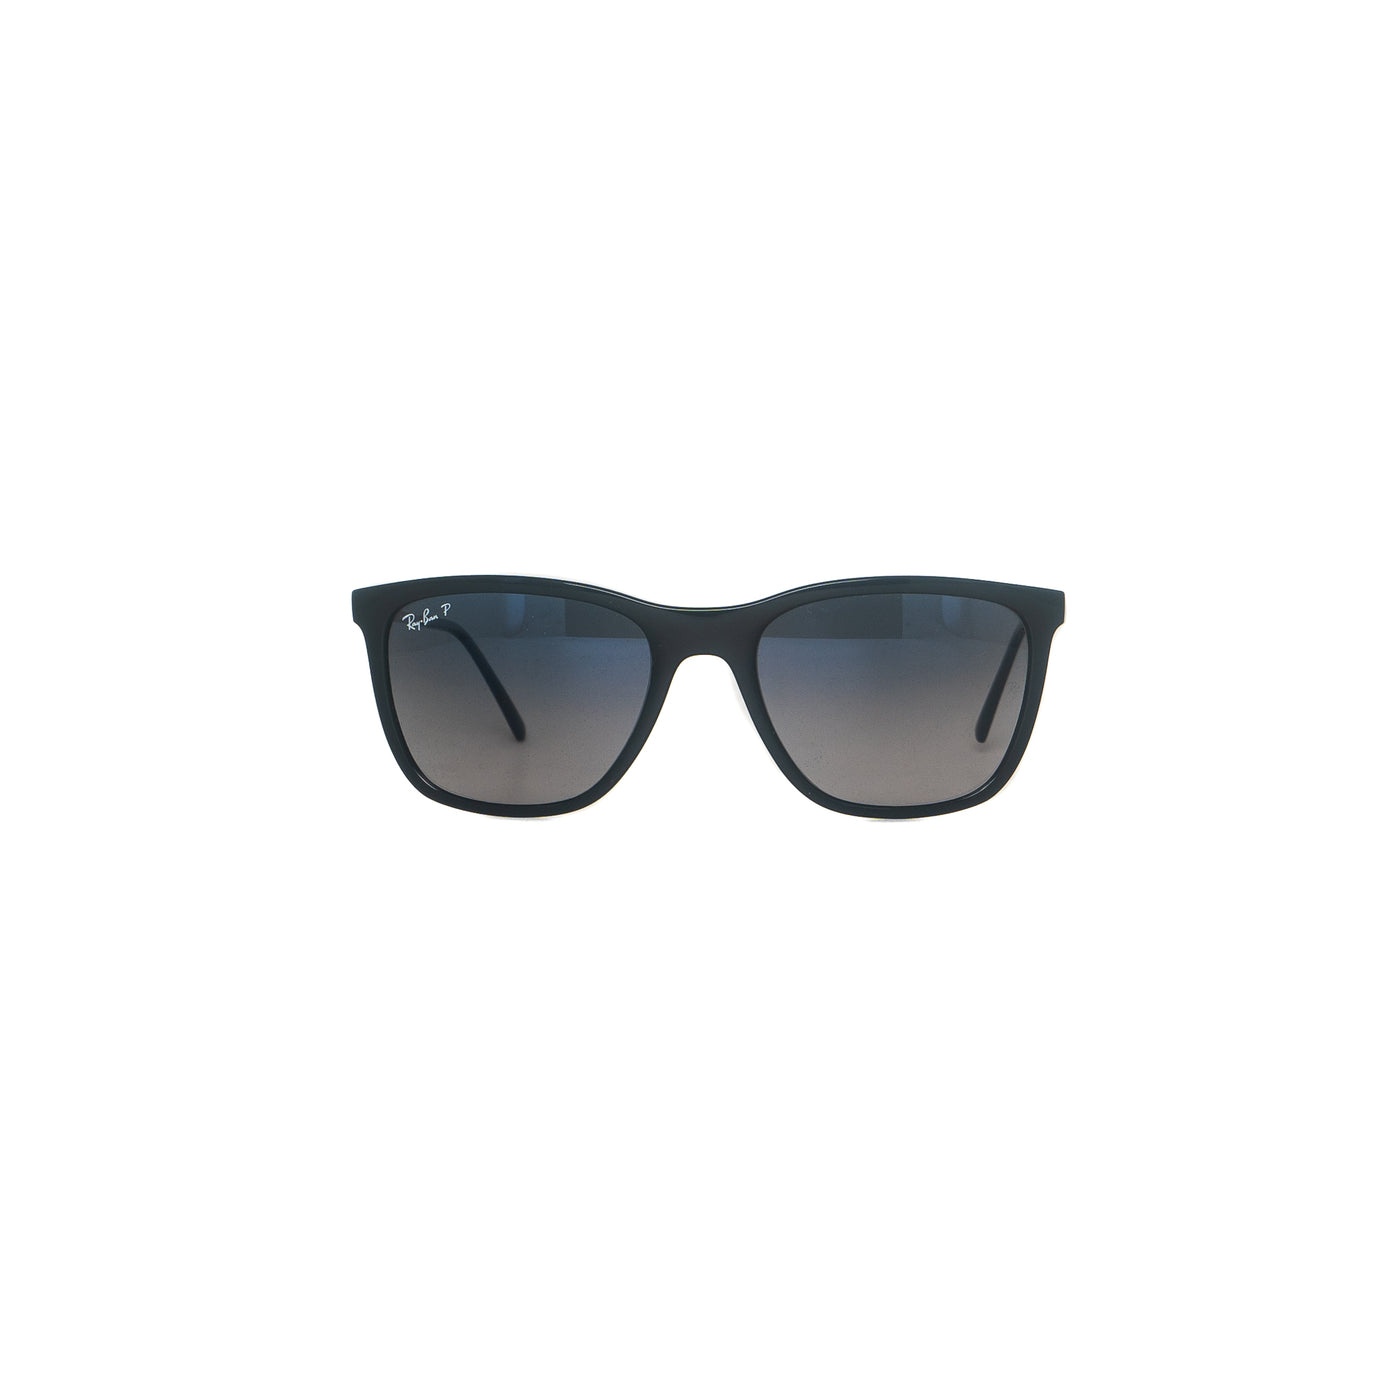 Ray-Ban RB4344/601/78 Polarized | Sunglasses - Vision Express Optical Philippines